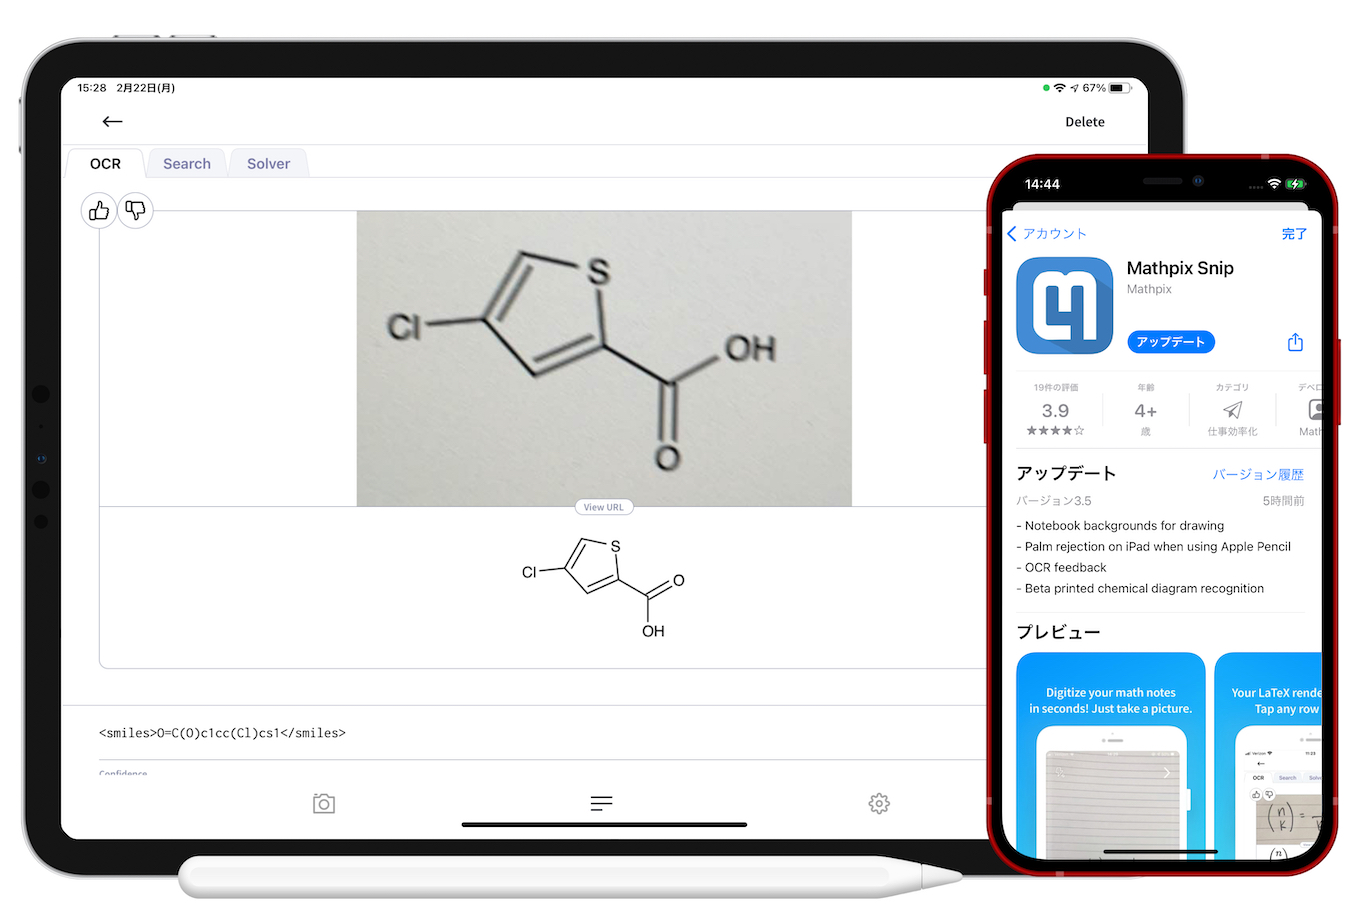 Mathpix Snip for iOS support Palm Rejection and chemical diagram recognition